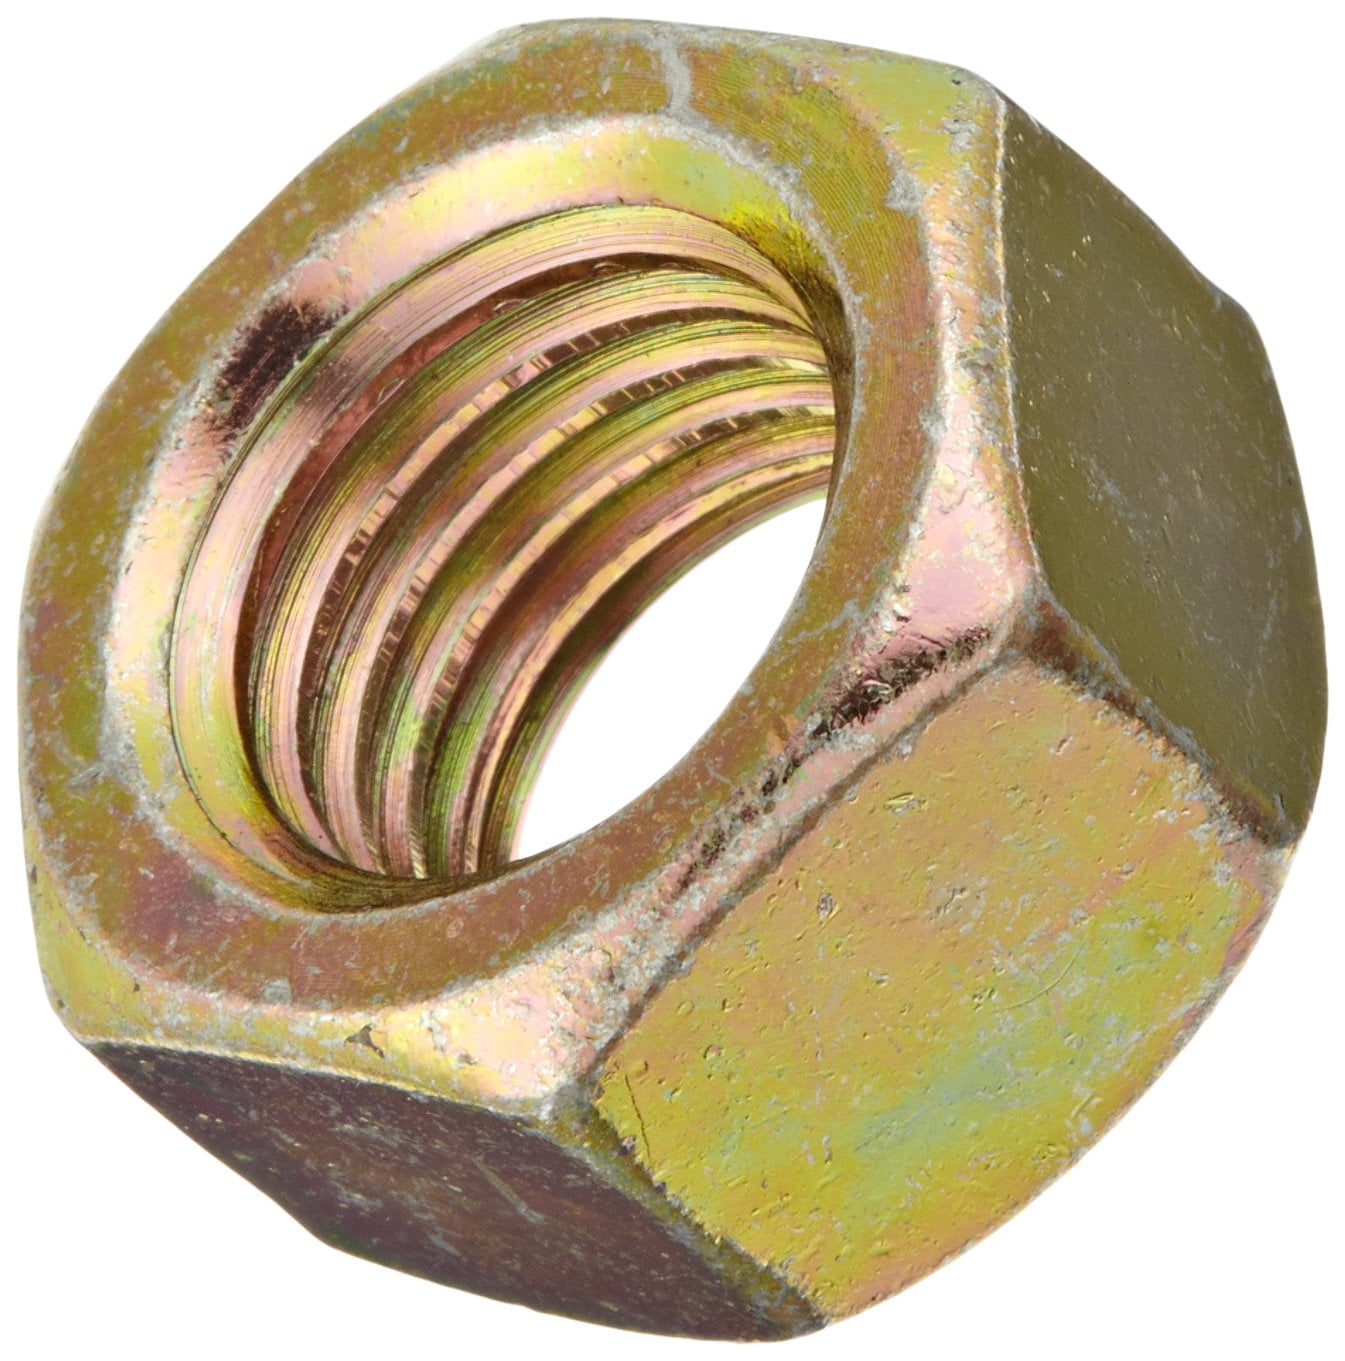 Zinc Plated LEFT HAND THREAD 1/2-13 Hex Finish Nuts 100